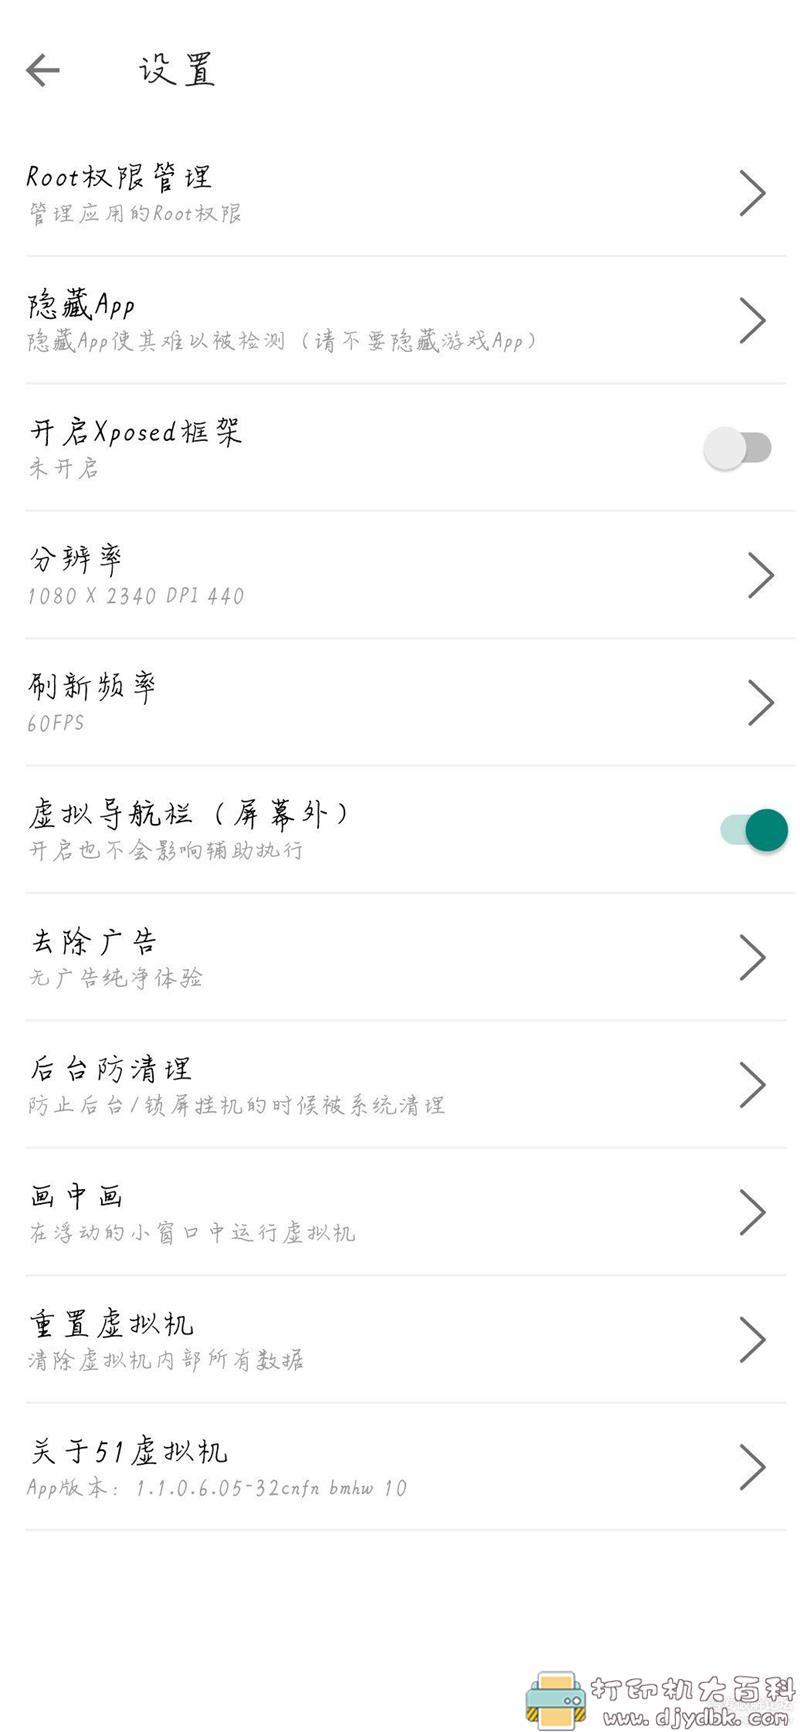 [Android]51虚拟安卓系统v1.1.0.6-安卓端的虚拟机(支持root，xposed框架) 配图 No.2